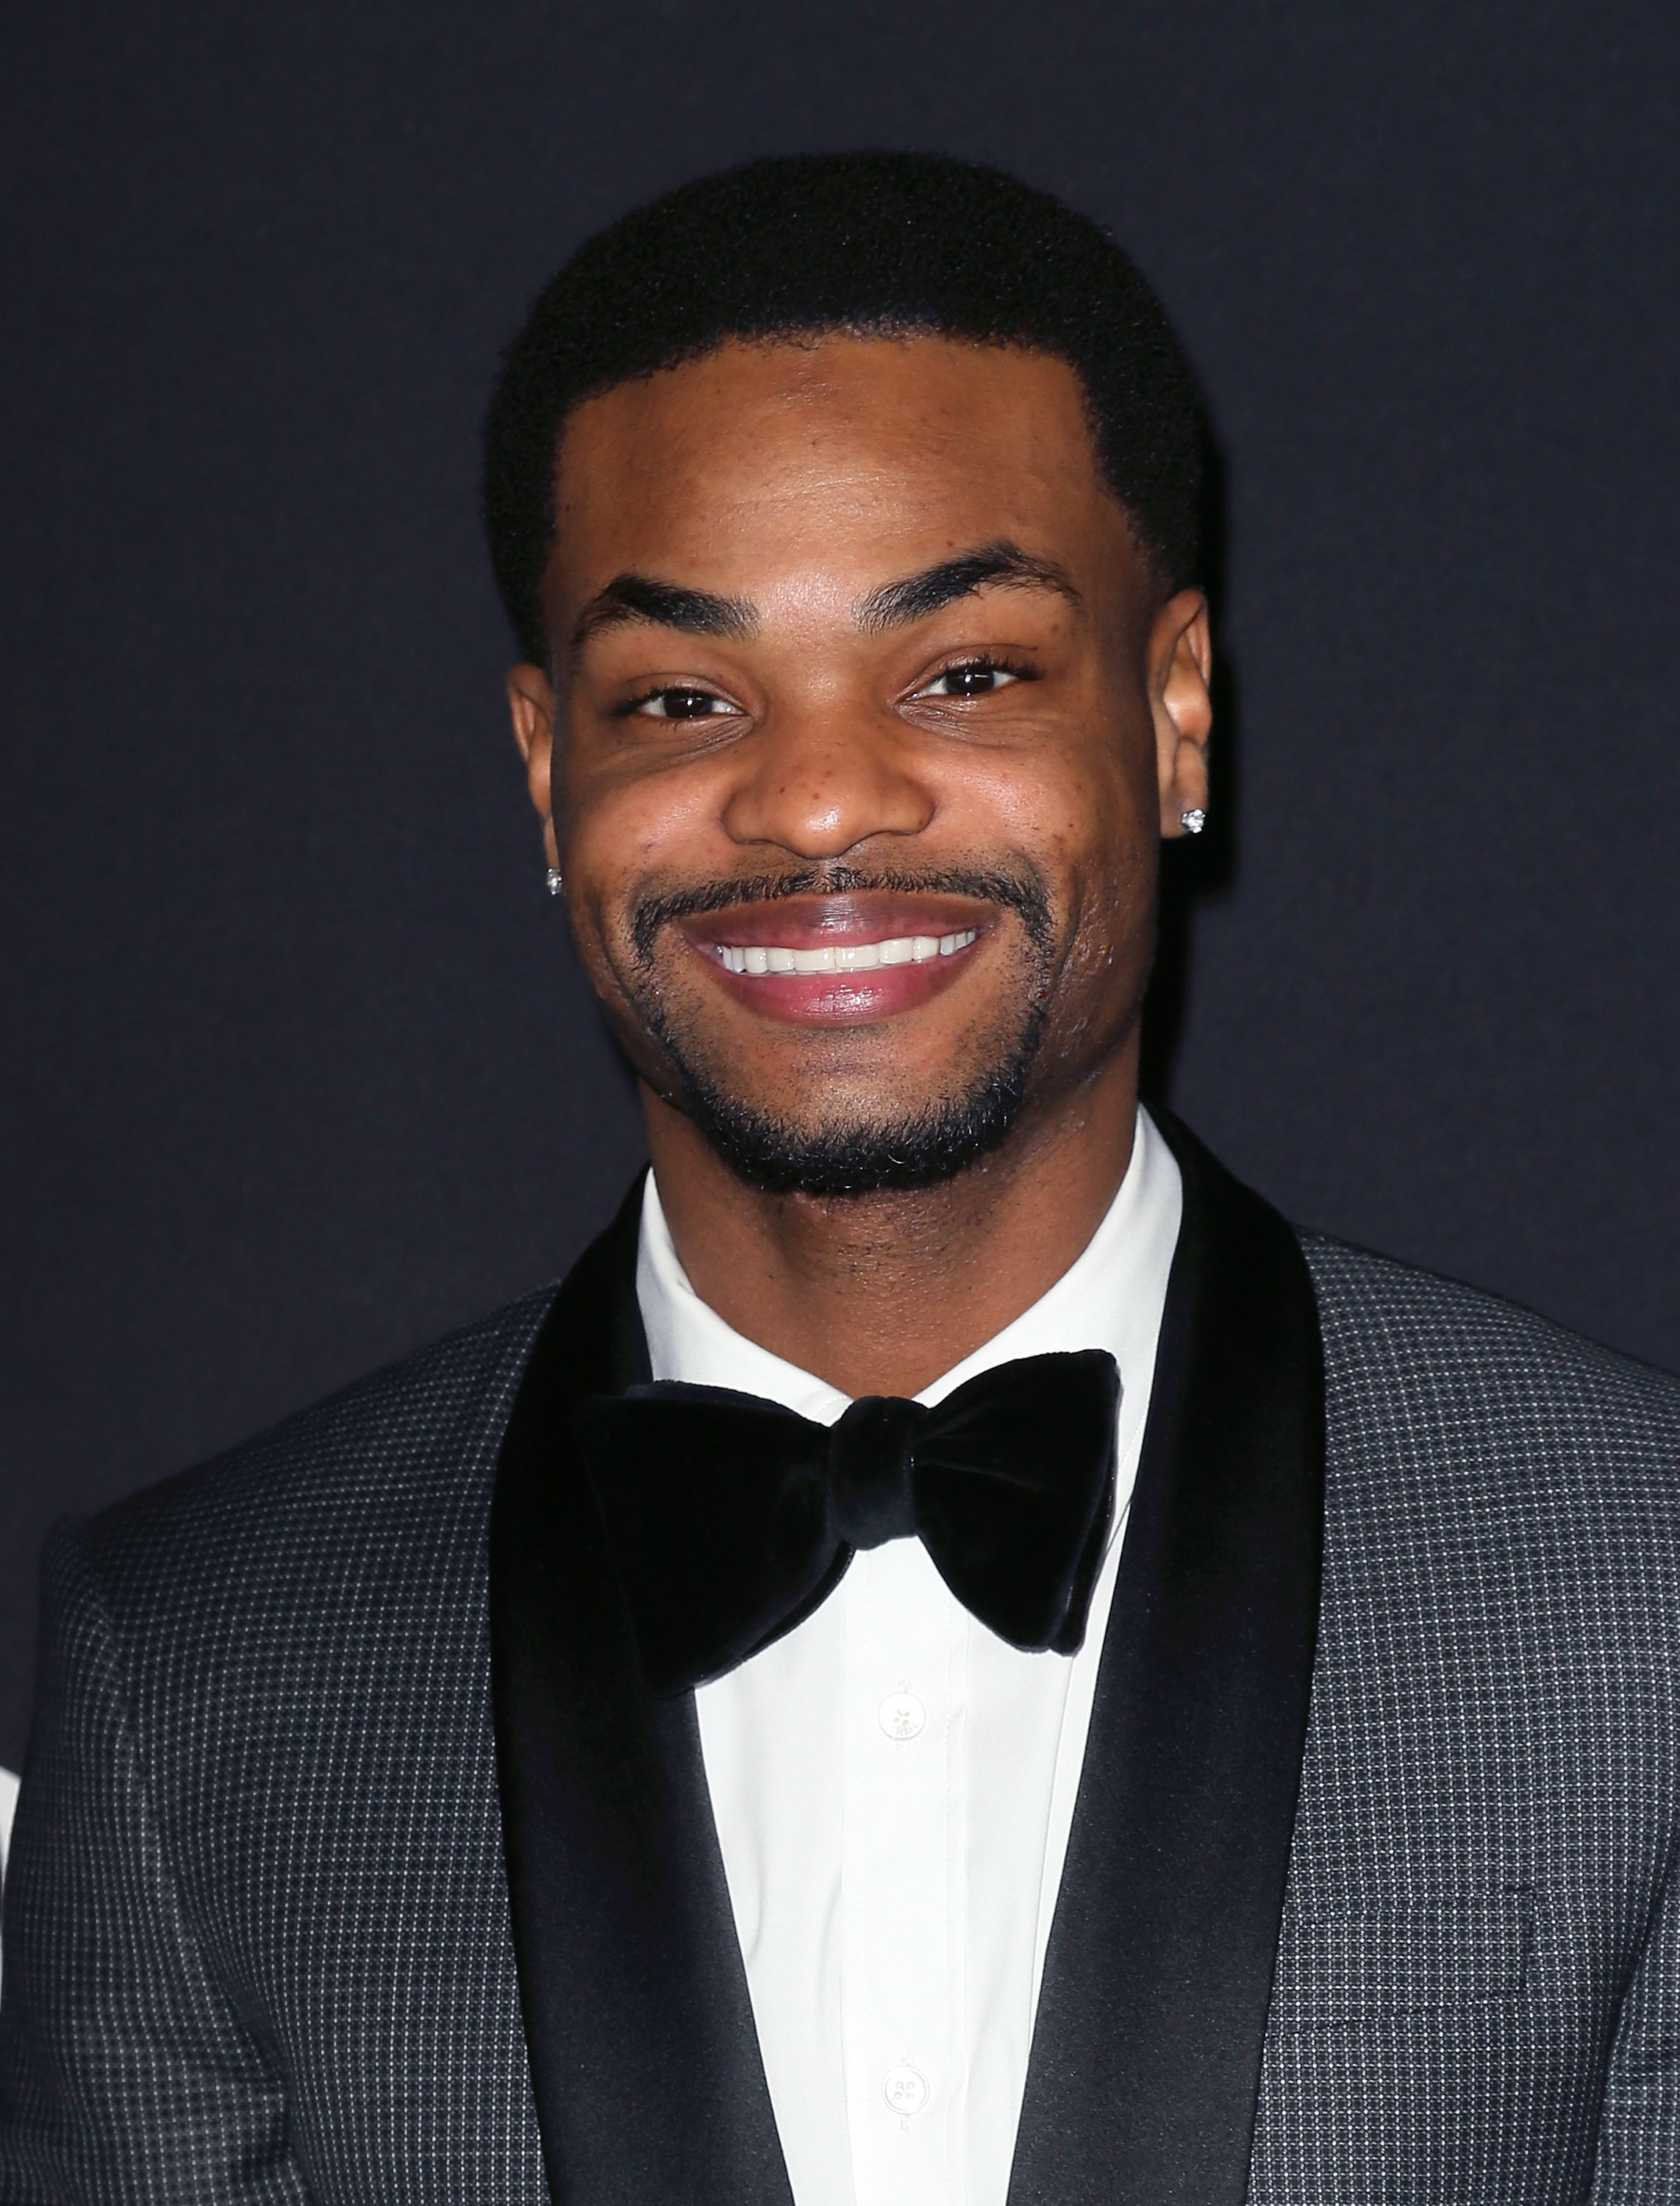 King Bach attends the premiere of "Fifty Shades of Black" on January 26, 2016 in Los Angeles, California. (David Livingston--2016 David Livingston/Getty Images)